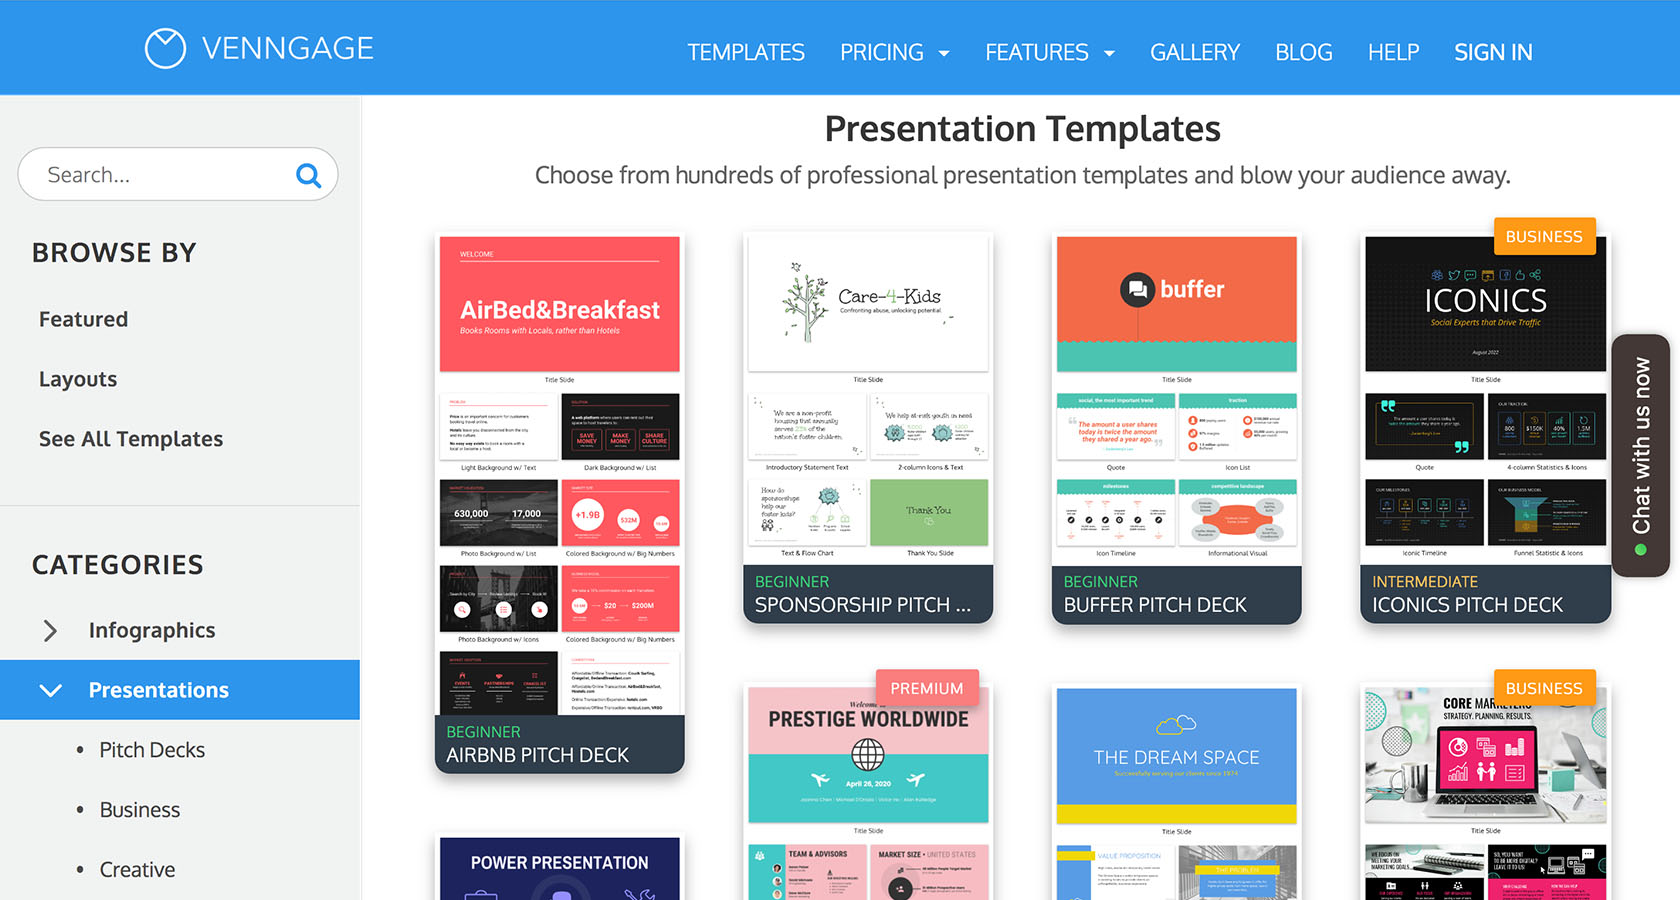 Presentation templates are a good start to great presentation design